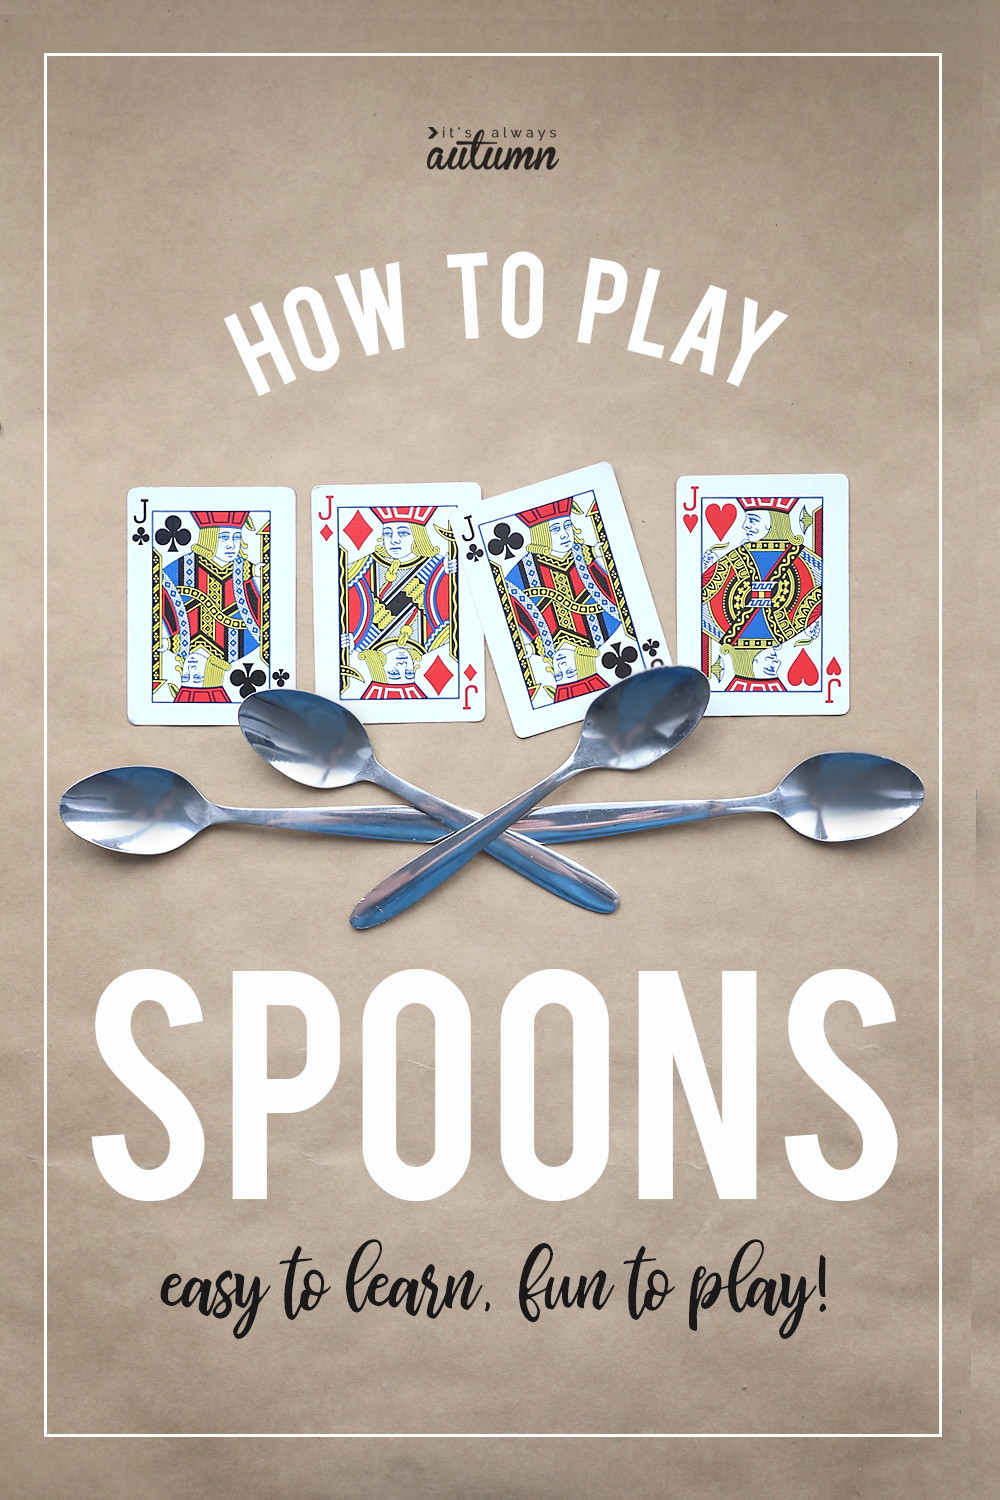 spoons and cards with text: how to play spoons